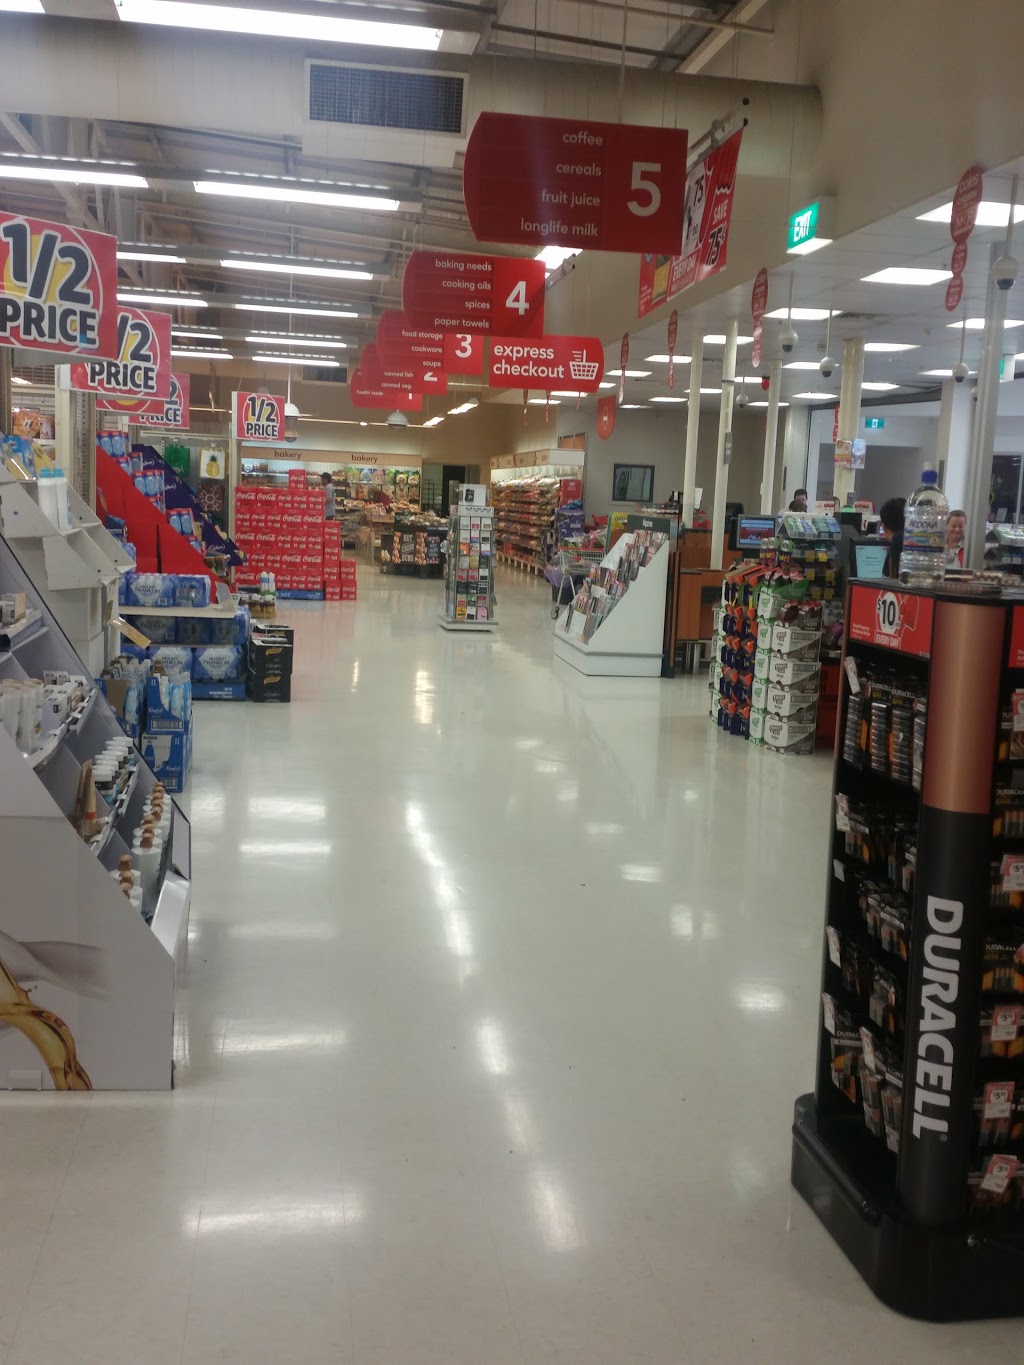 Coles Sth Muswellbrook | supermarket | 19 - 29 Rutherford Rd, Muswellbrook NSW 2333, Australia | 0265423000 OR +61 2 6542 3000